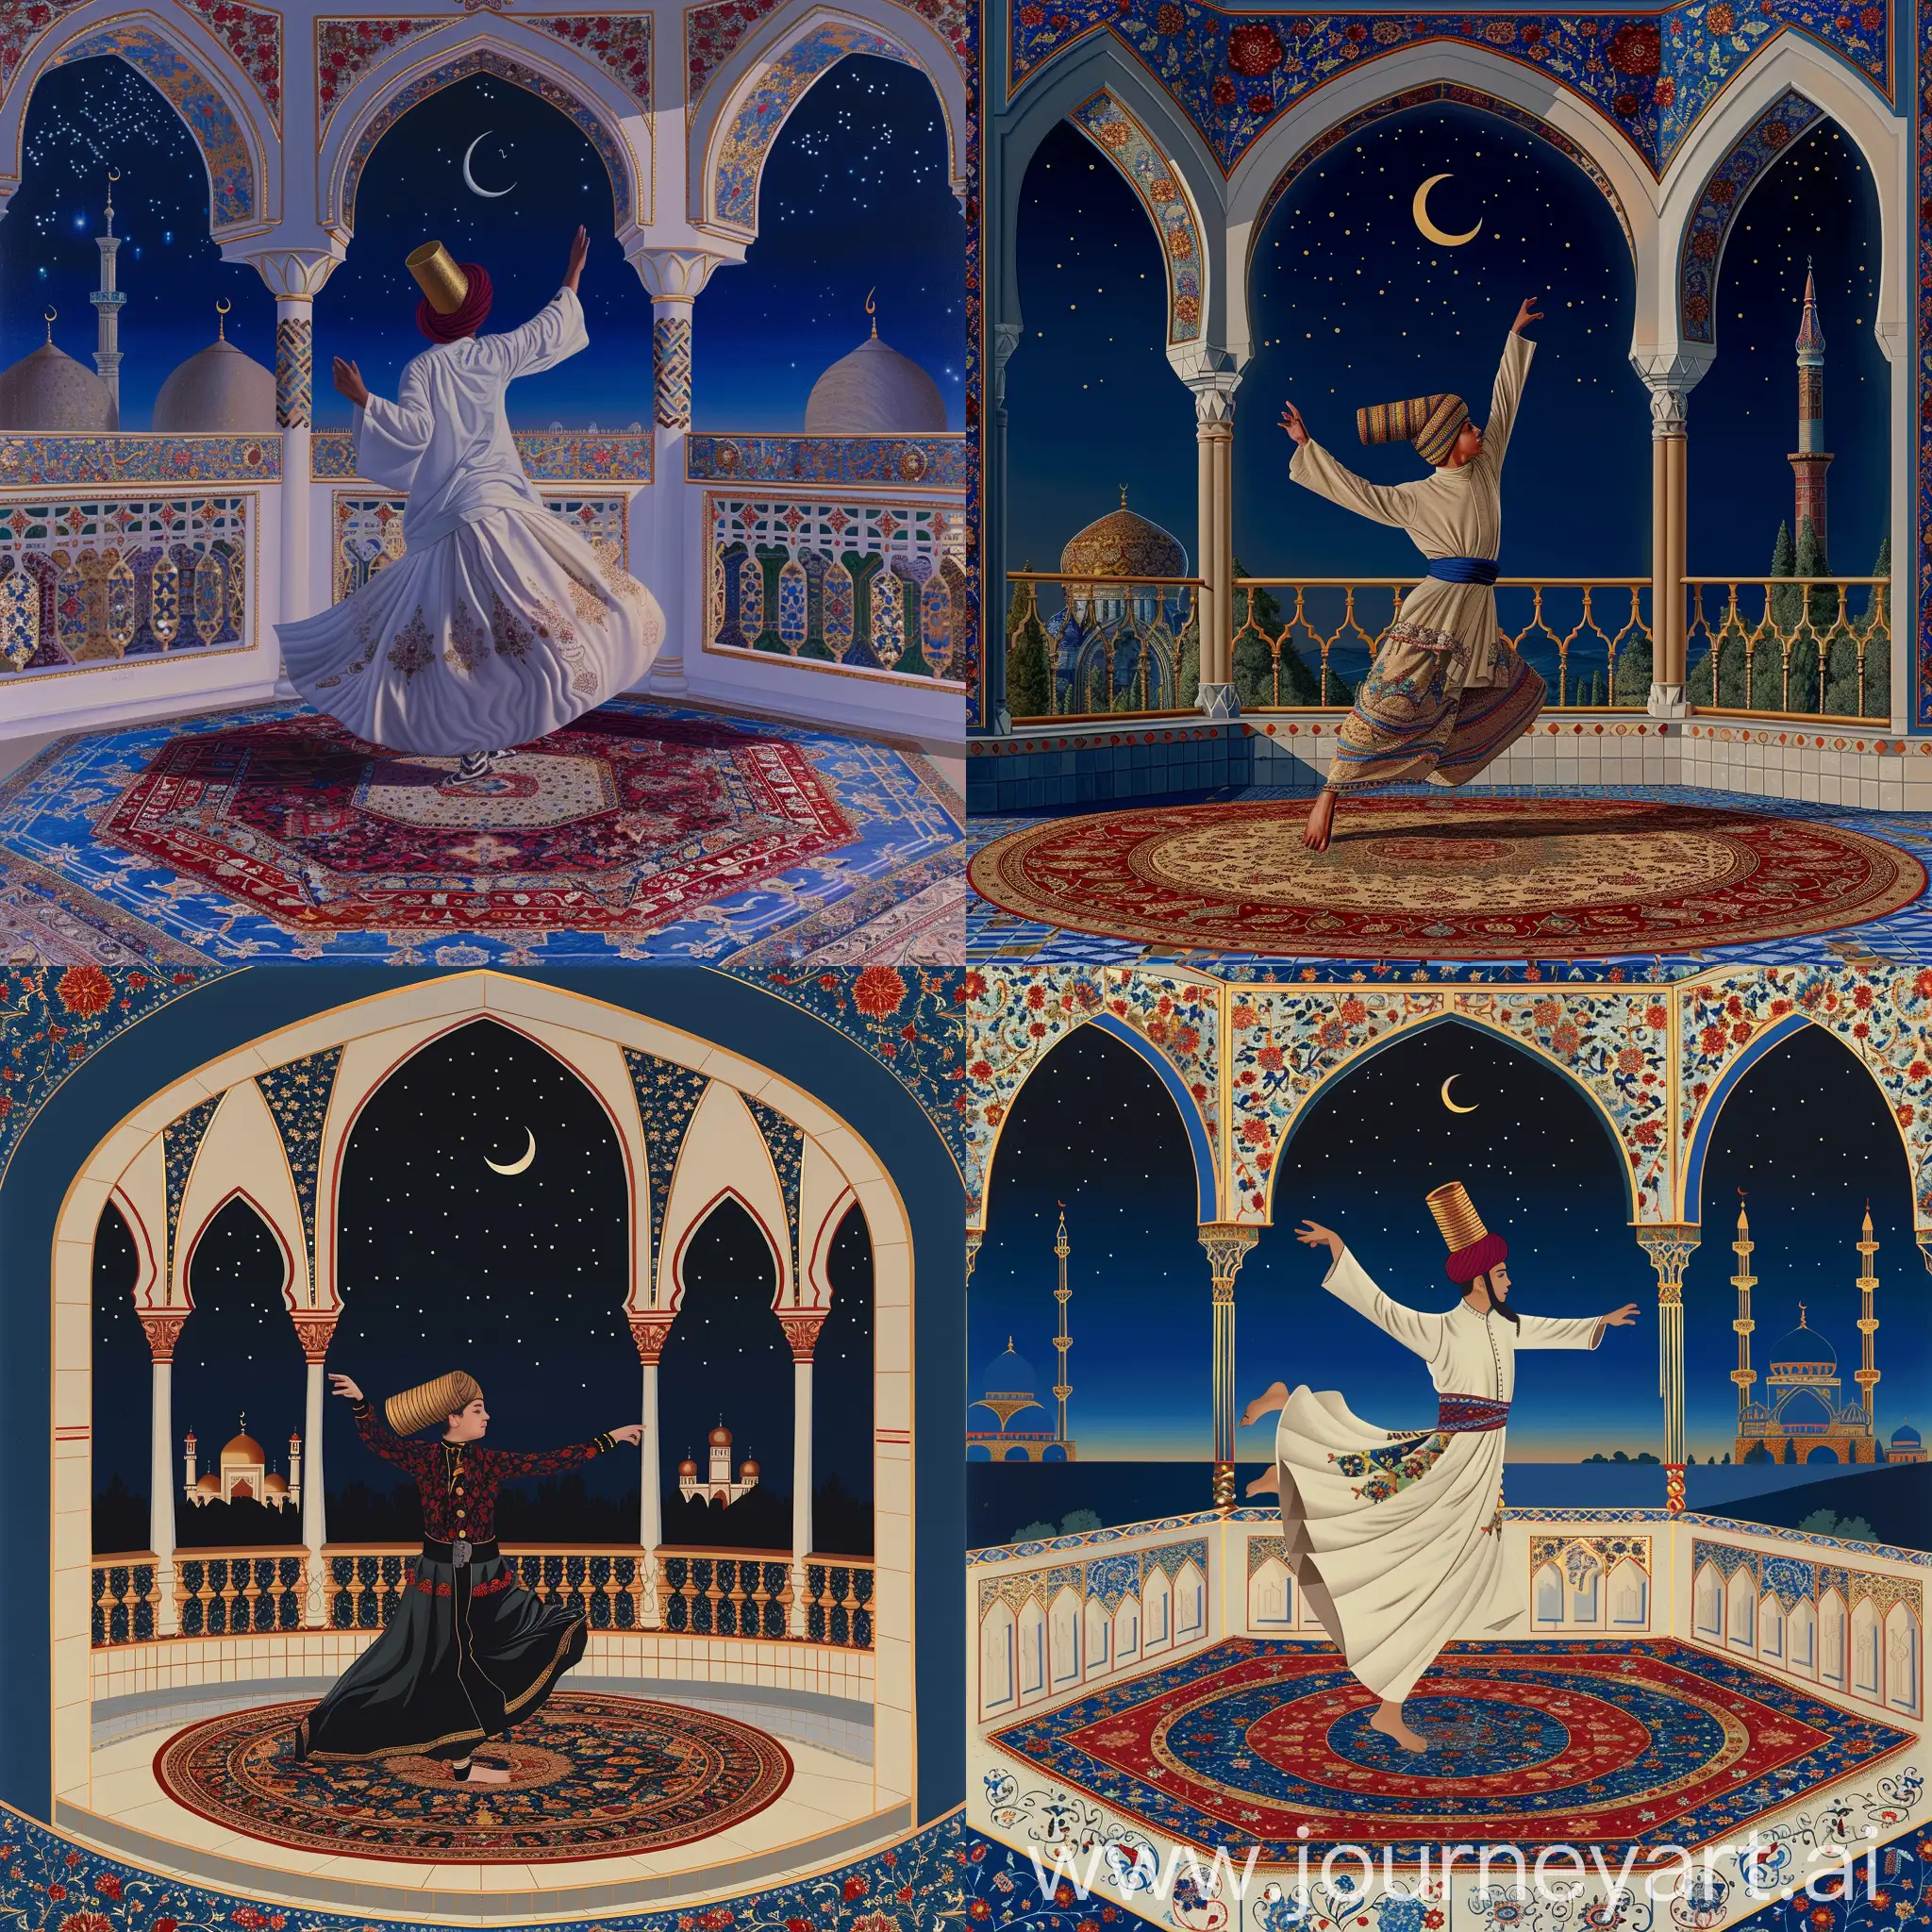 A young British dervish wearing cylindrical fez cap performing sufi whirling sema dance on a persian carpet, inside an octagonal balcony having three arches decorated with red blue gold persian floral motifs, serene night sky with a crescent, view of Persian tiled mosque, White blue red golden composition --v 6 --ar 2:3 --sref https://cdn.discordapp.com/attachments/1213041174428782623/1246562622023667812/IMG_20240326_220808.png?ex=665d8029&is=665c2ea9&hm=81116a923e48e05e6dec61f955e335f3545c7d1b684e25425125fecf09b3a8e1& --sw 999 --s 999 --style raw